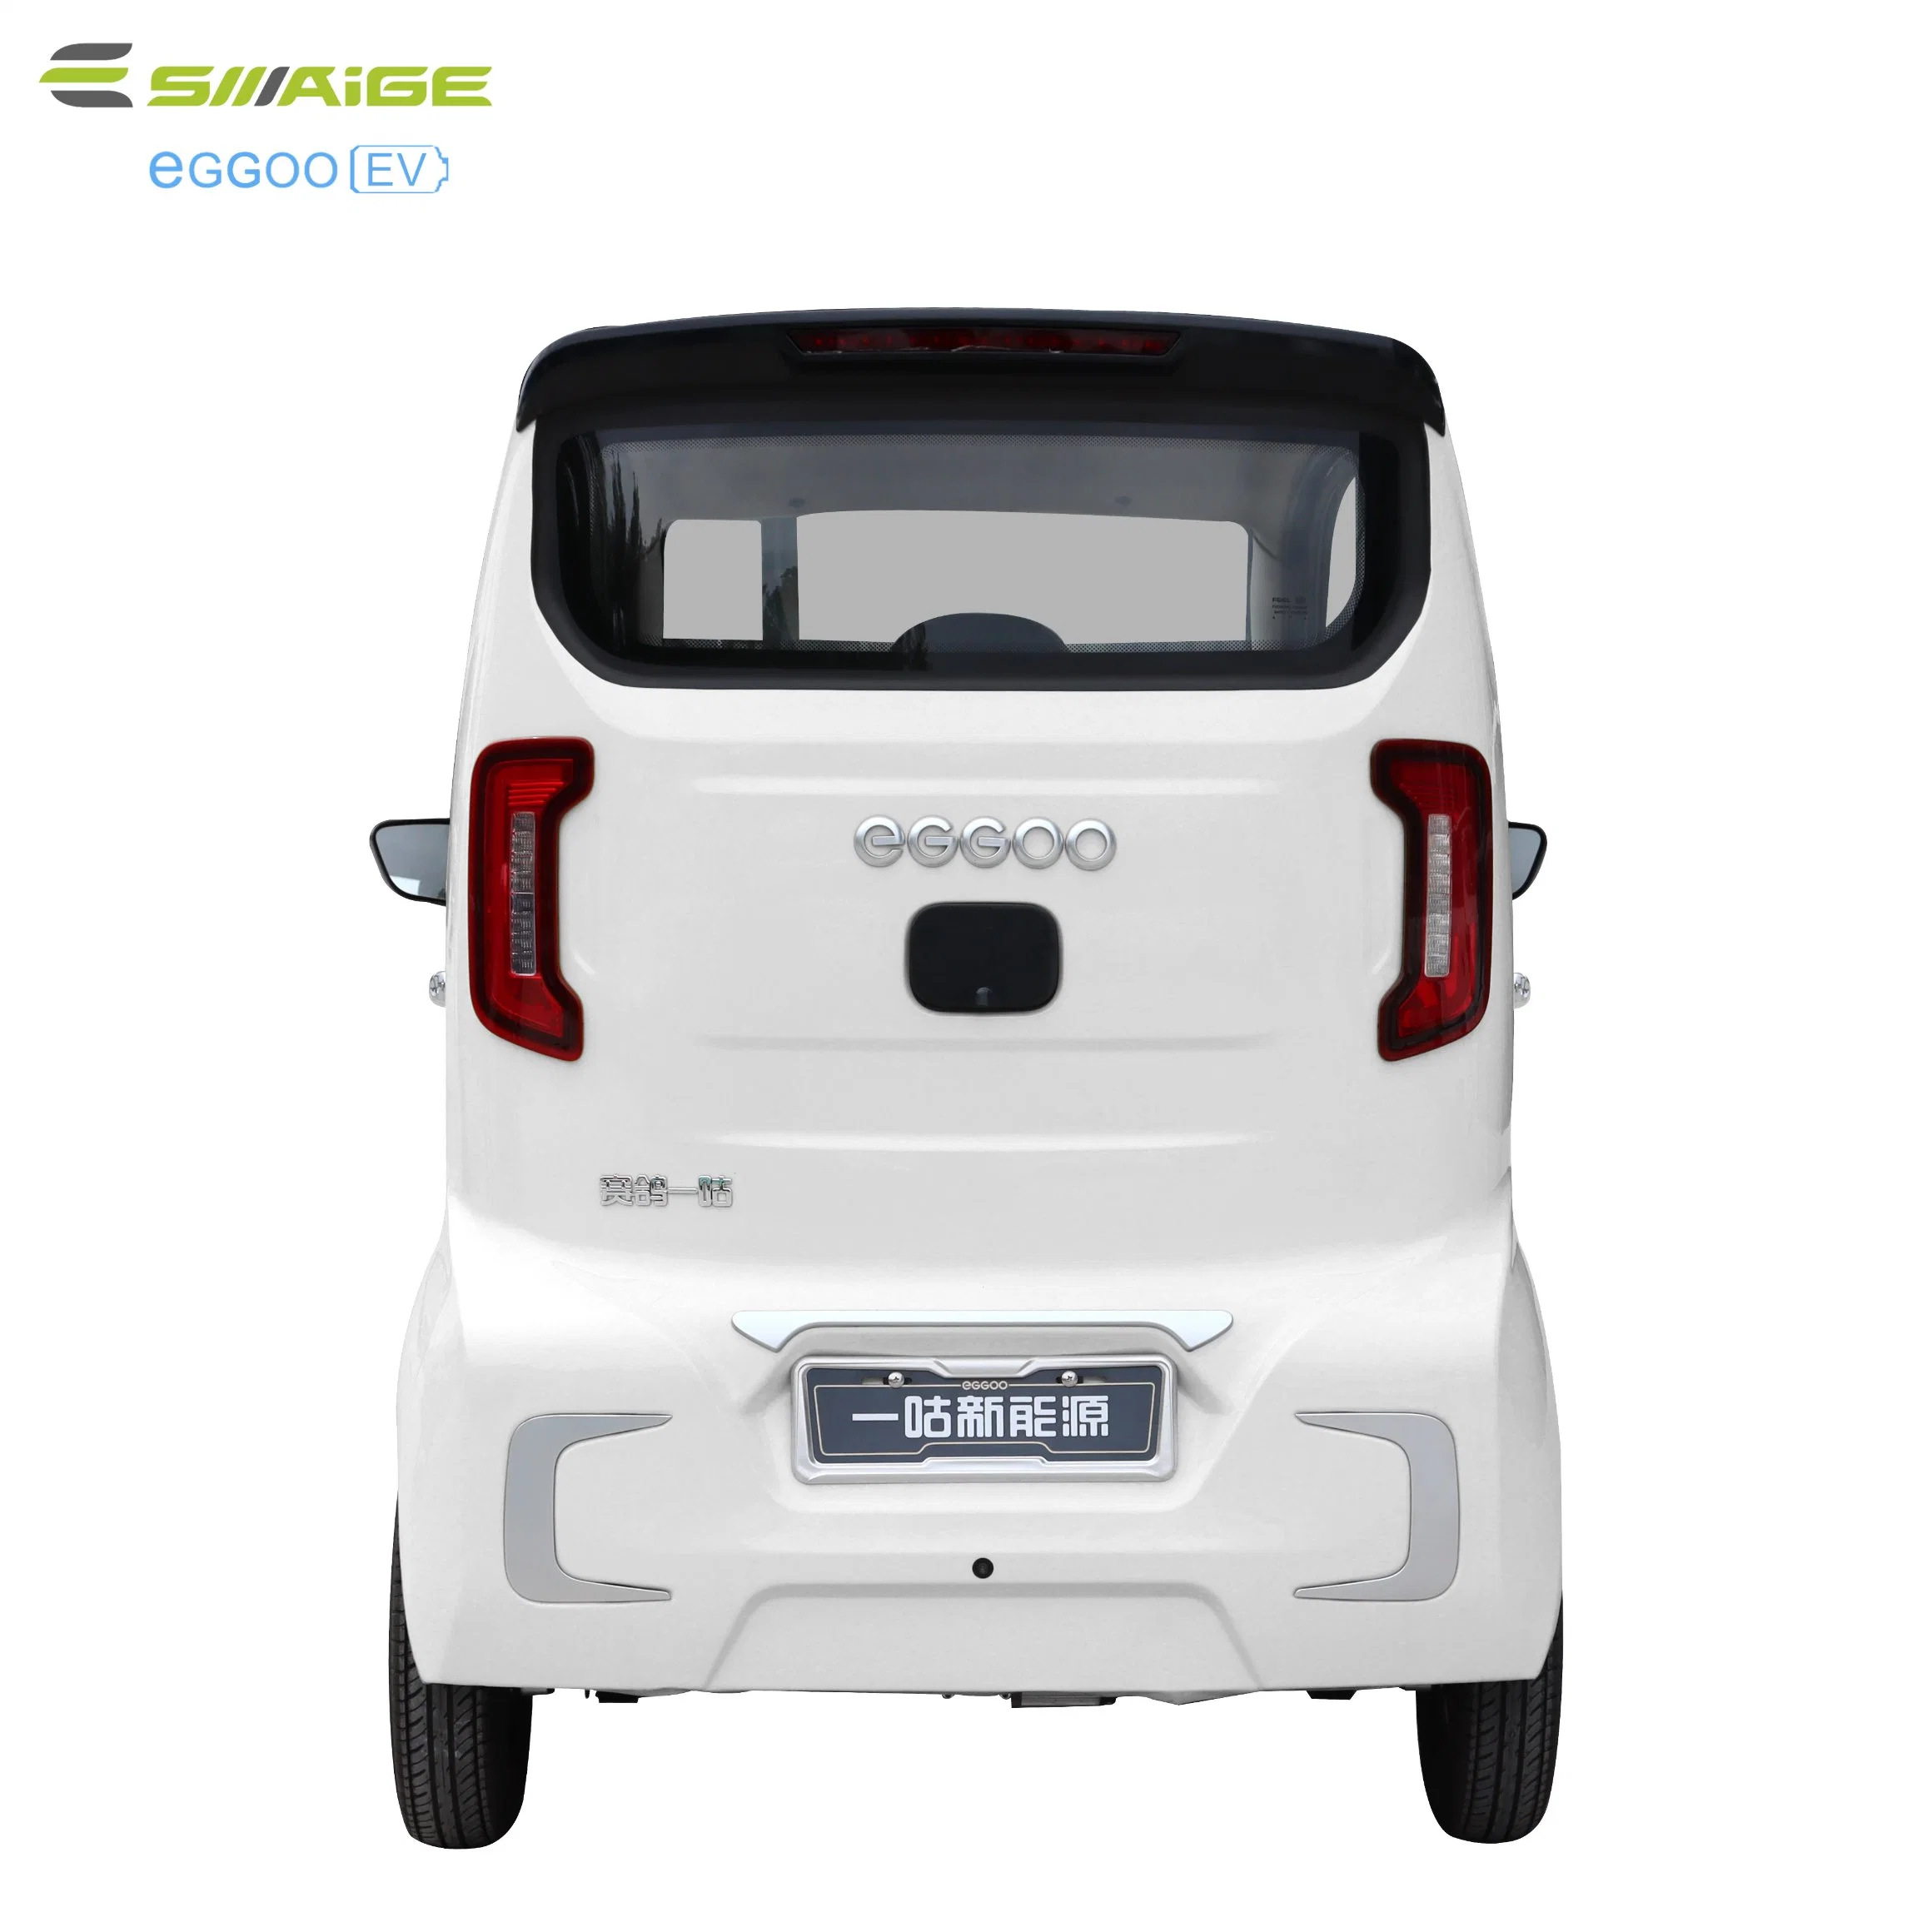 4-Seat Electric Car with 45km/H 1500W Motor and Lead Acid Battery or Lithium Battery New Energy with Rear View Camera